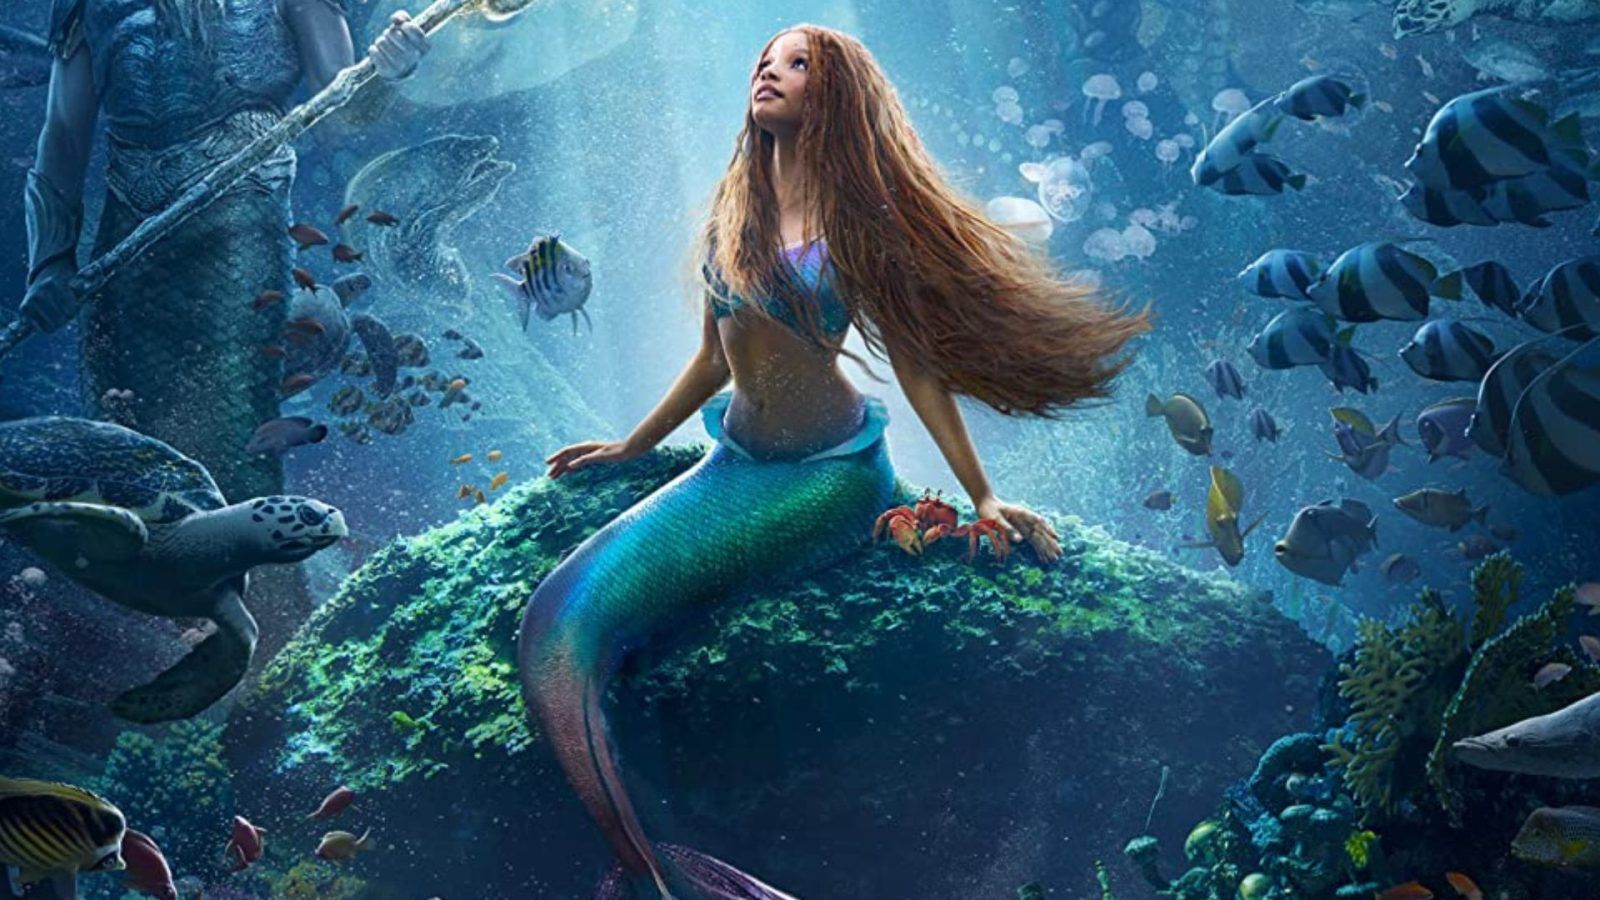 The Little Mermaid review: Twitter loves Halle Bailey as Ariel